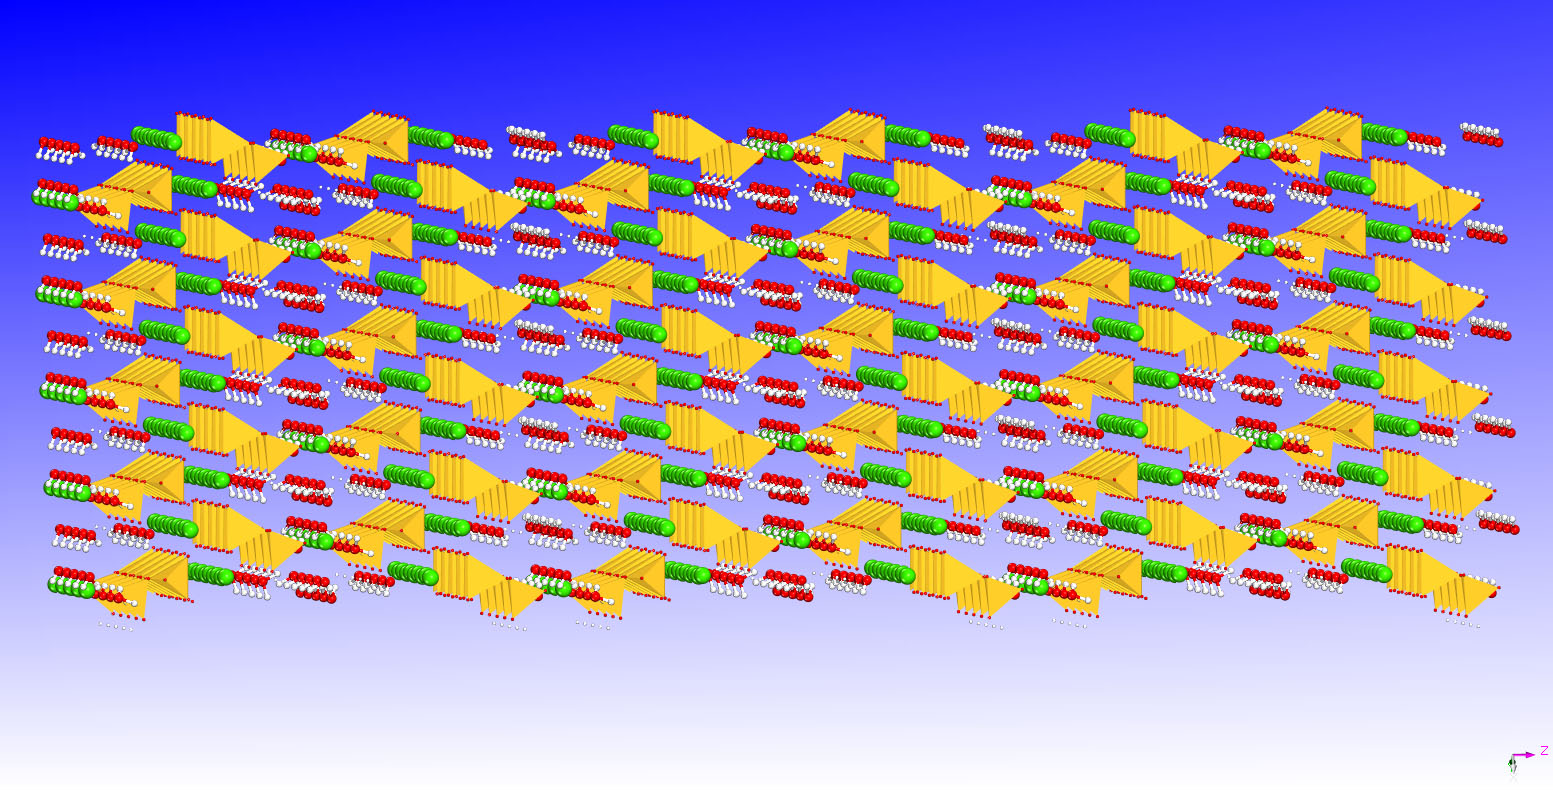 Enlarged view: A simulated construct of cement produced by a model in the cemff database. The model contains hydrogen (white), oxygen (red), silicate (yellow) and calcium (green). (Image: ETH Zurich)